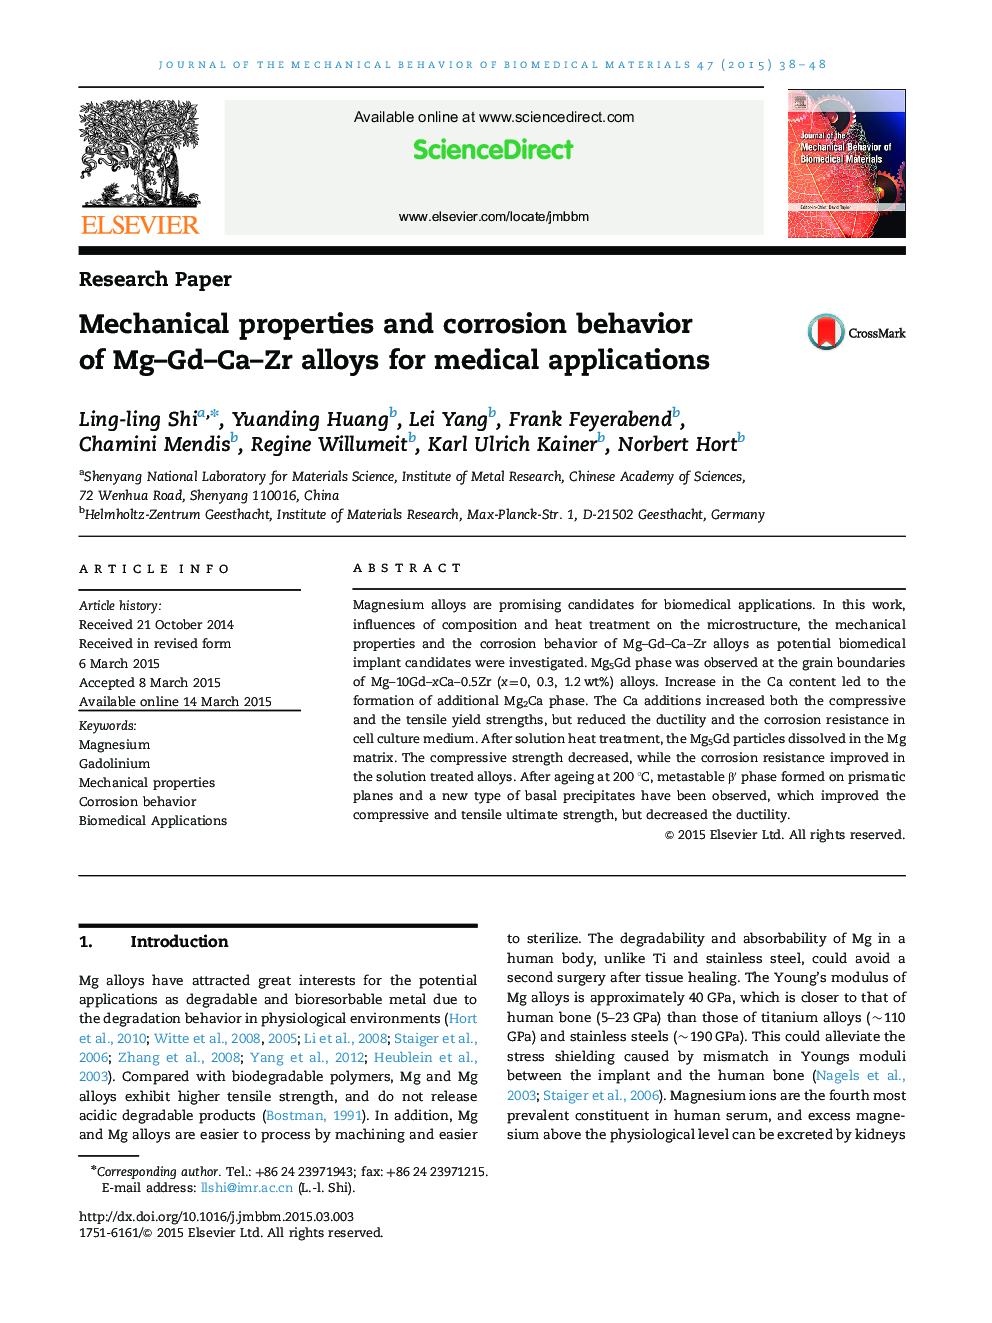 Mechanical properties and corrosion behavior of Mg–Gd–Ca–Zr alloys for medical applications